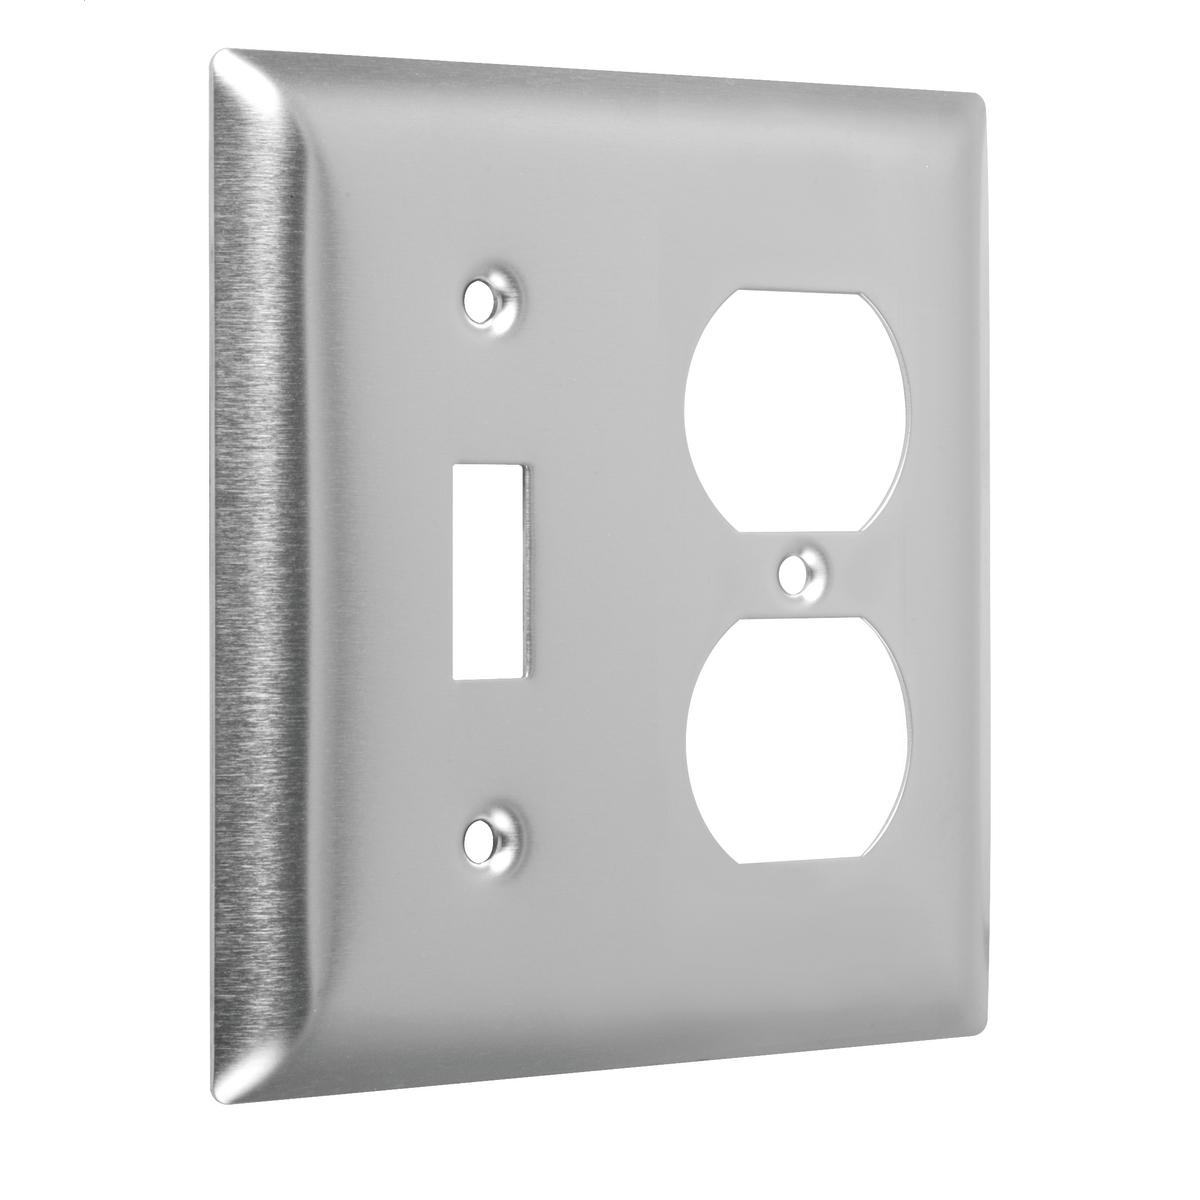 Hubbell WSS-TD 2-Gang Metal Wallplate, Standard, Toggle/Duplex, Stainless Steel  ; Easily primed and painted to match or complement walls. ; Won't bow, crack or distort during installation. ; Premium North American powder coat. ; Includes screw(s) in matching finish.